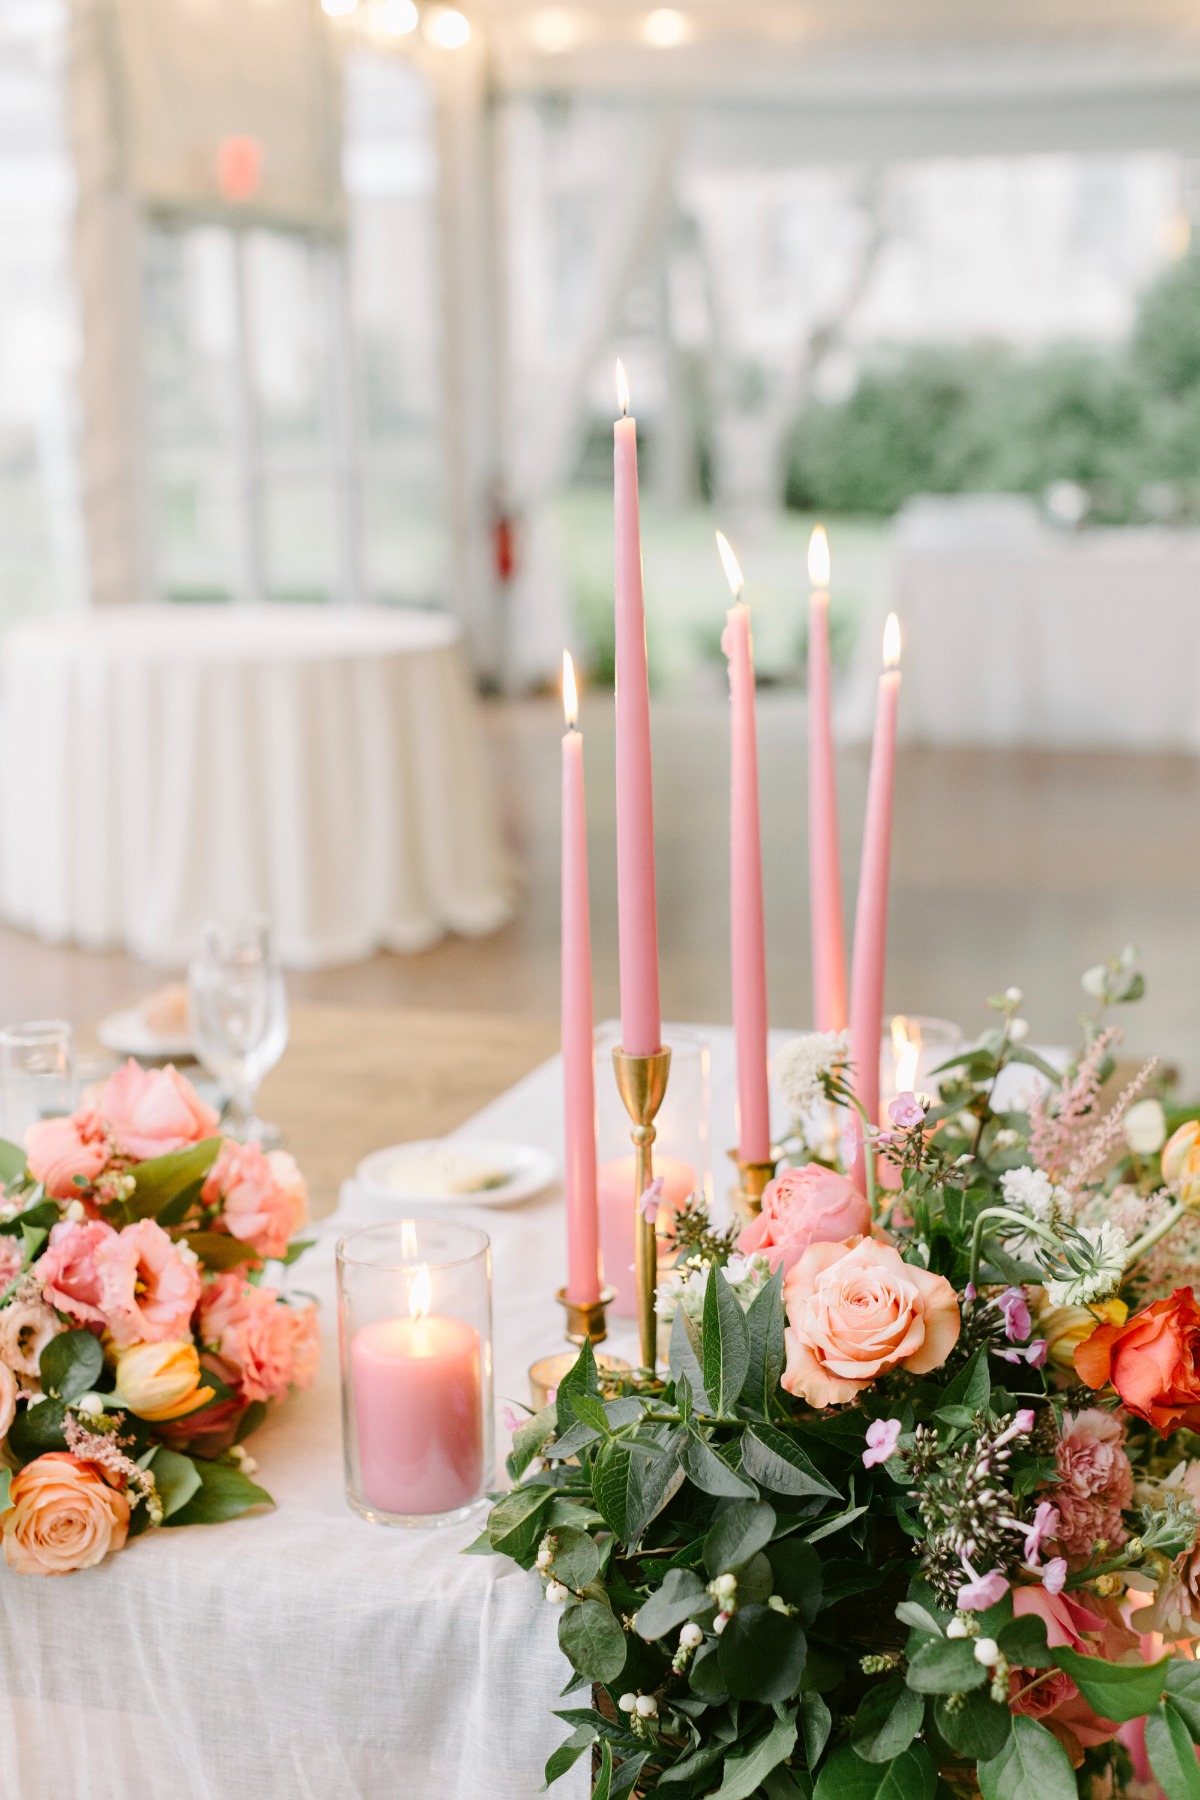 Reception table floral centerpieces with pink candles